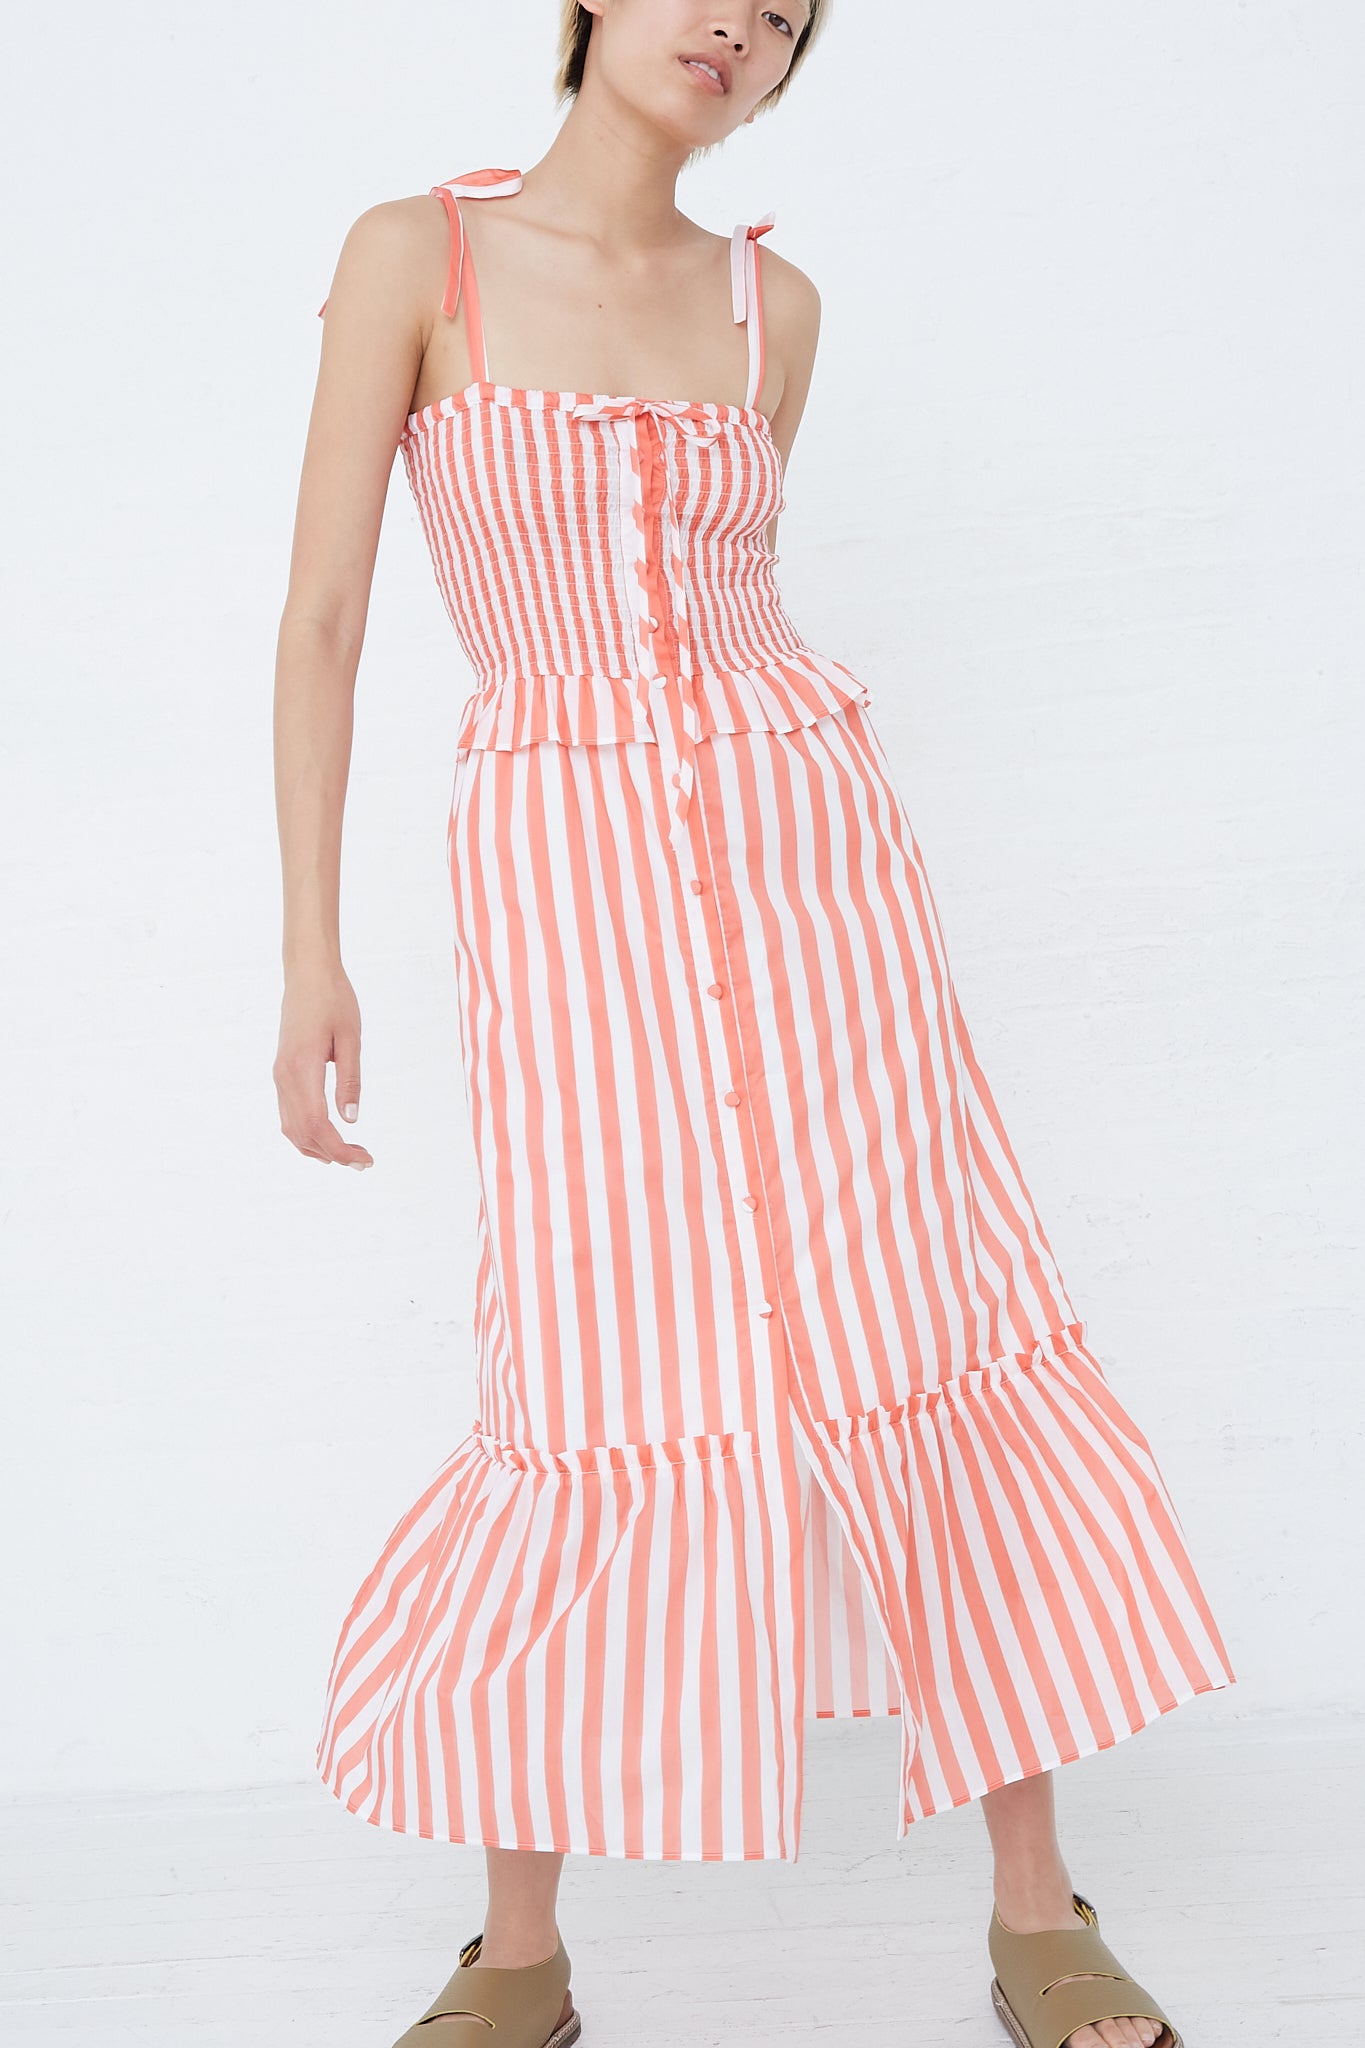 The model is wearing the Loretta Caponi Alberica Dress in Coral Stripe, an orange and white striped midi dress with adjustable tie straps.